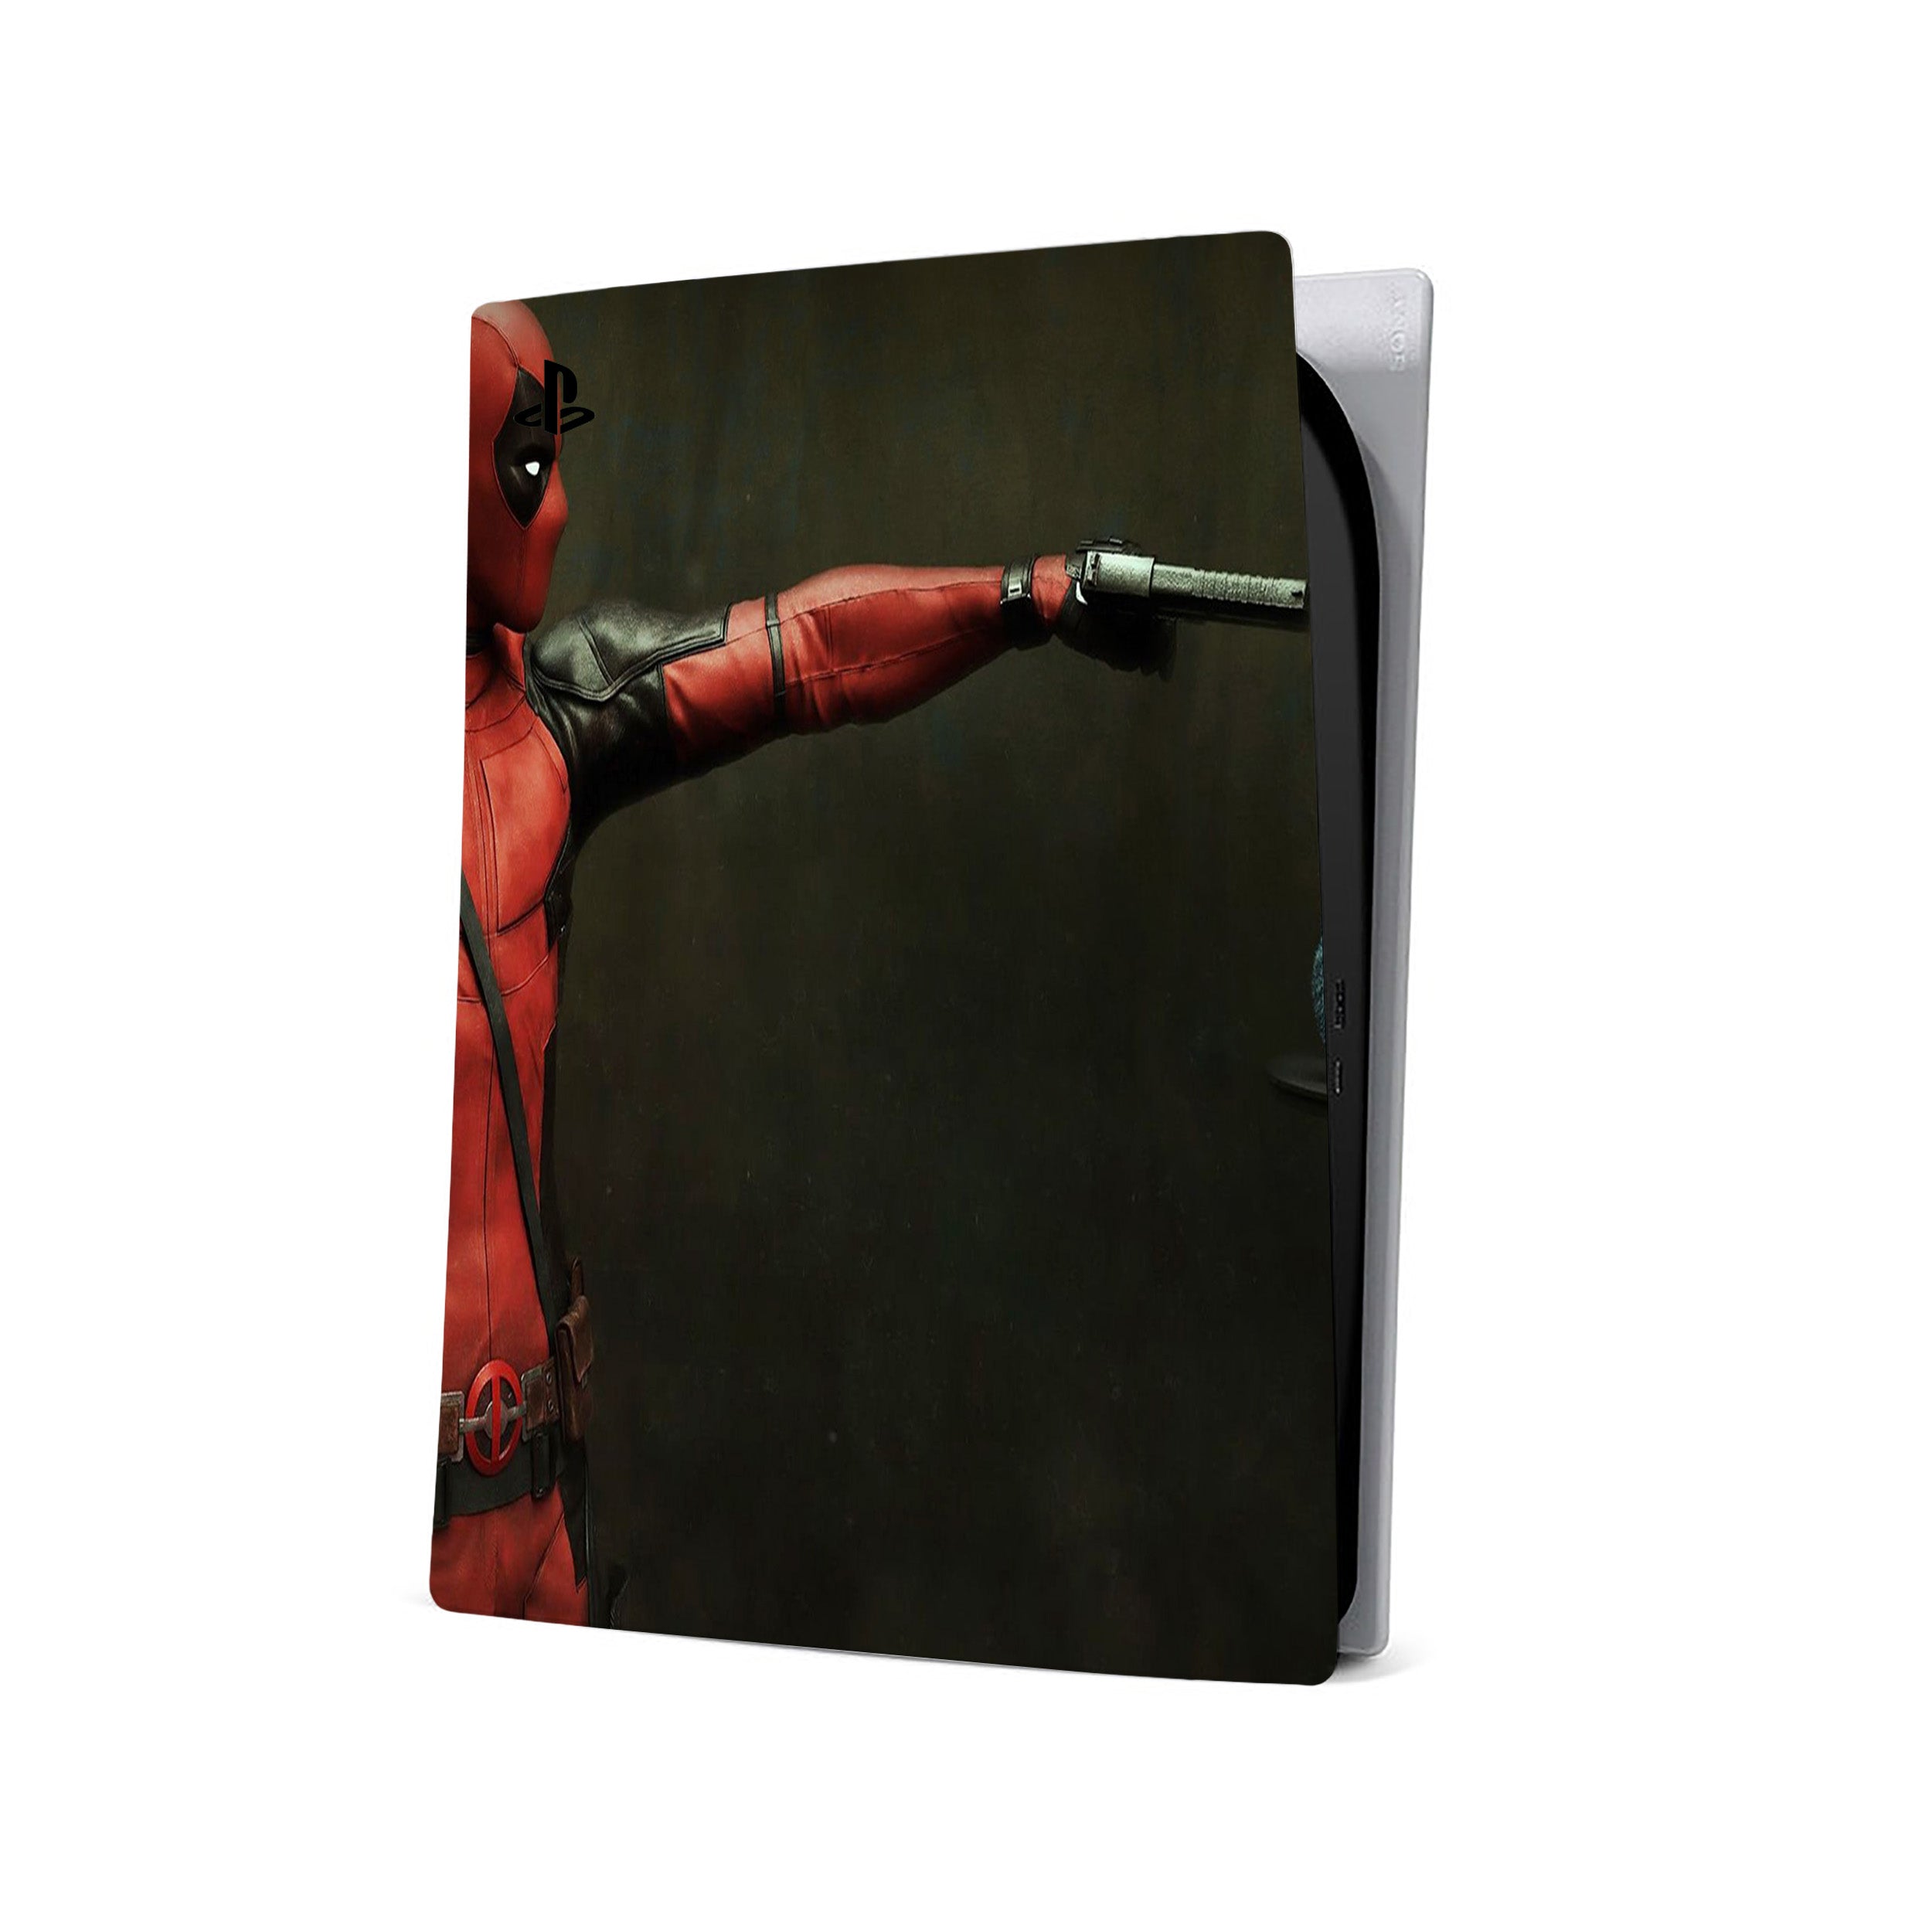 A video game skin featuring a Marvel Dead Pool design for the PS5.